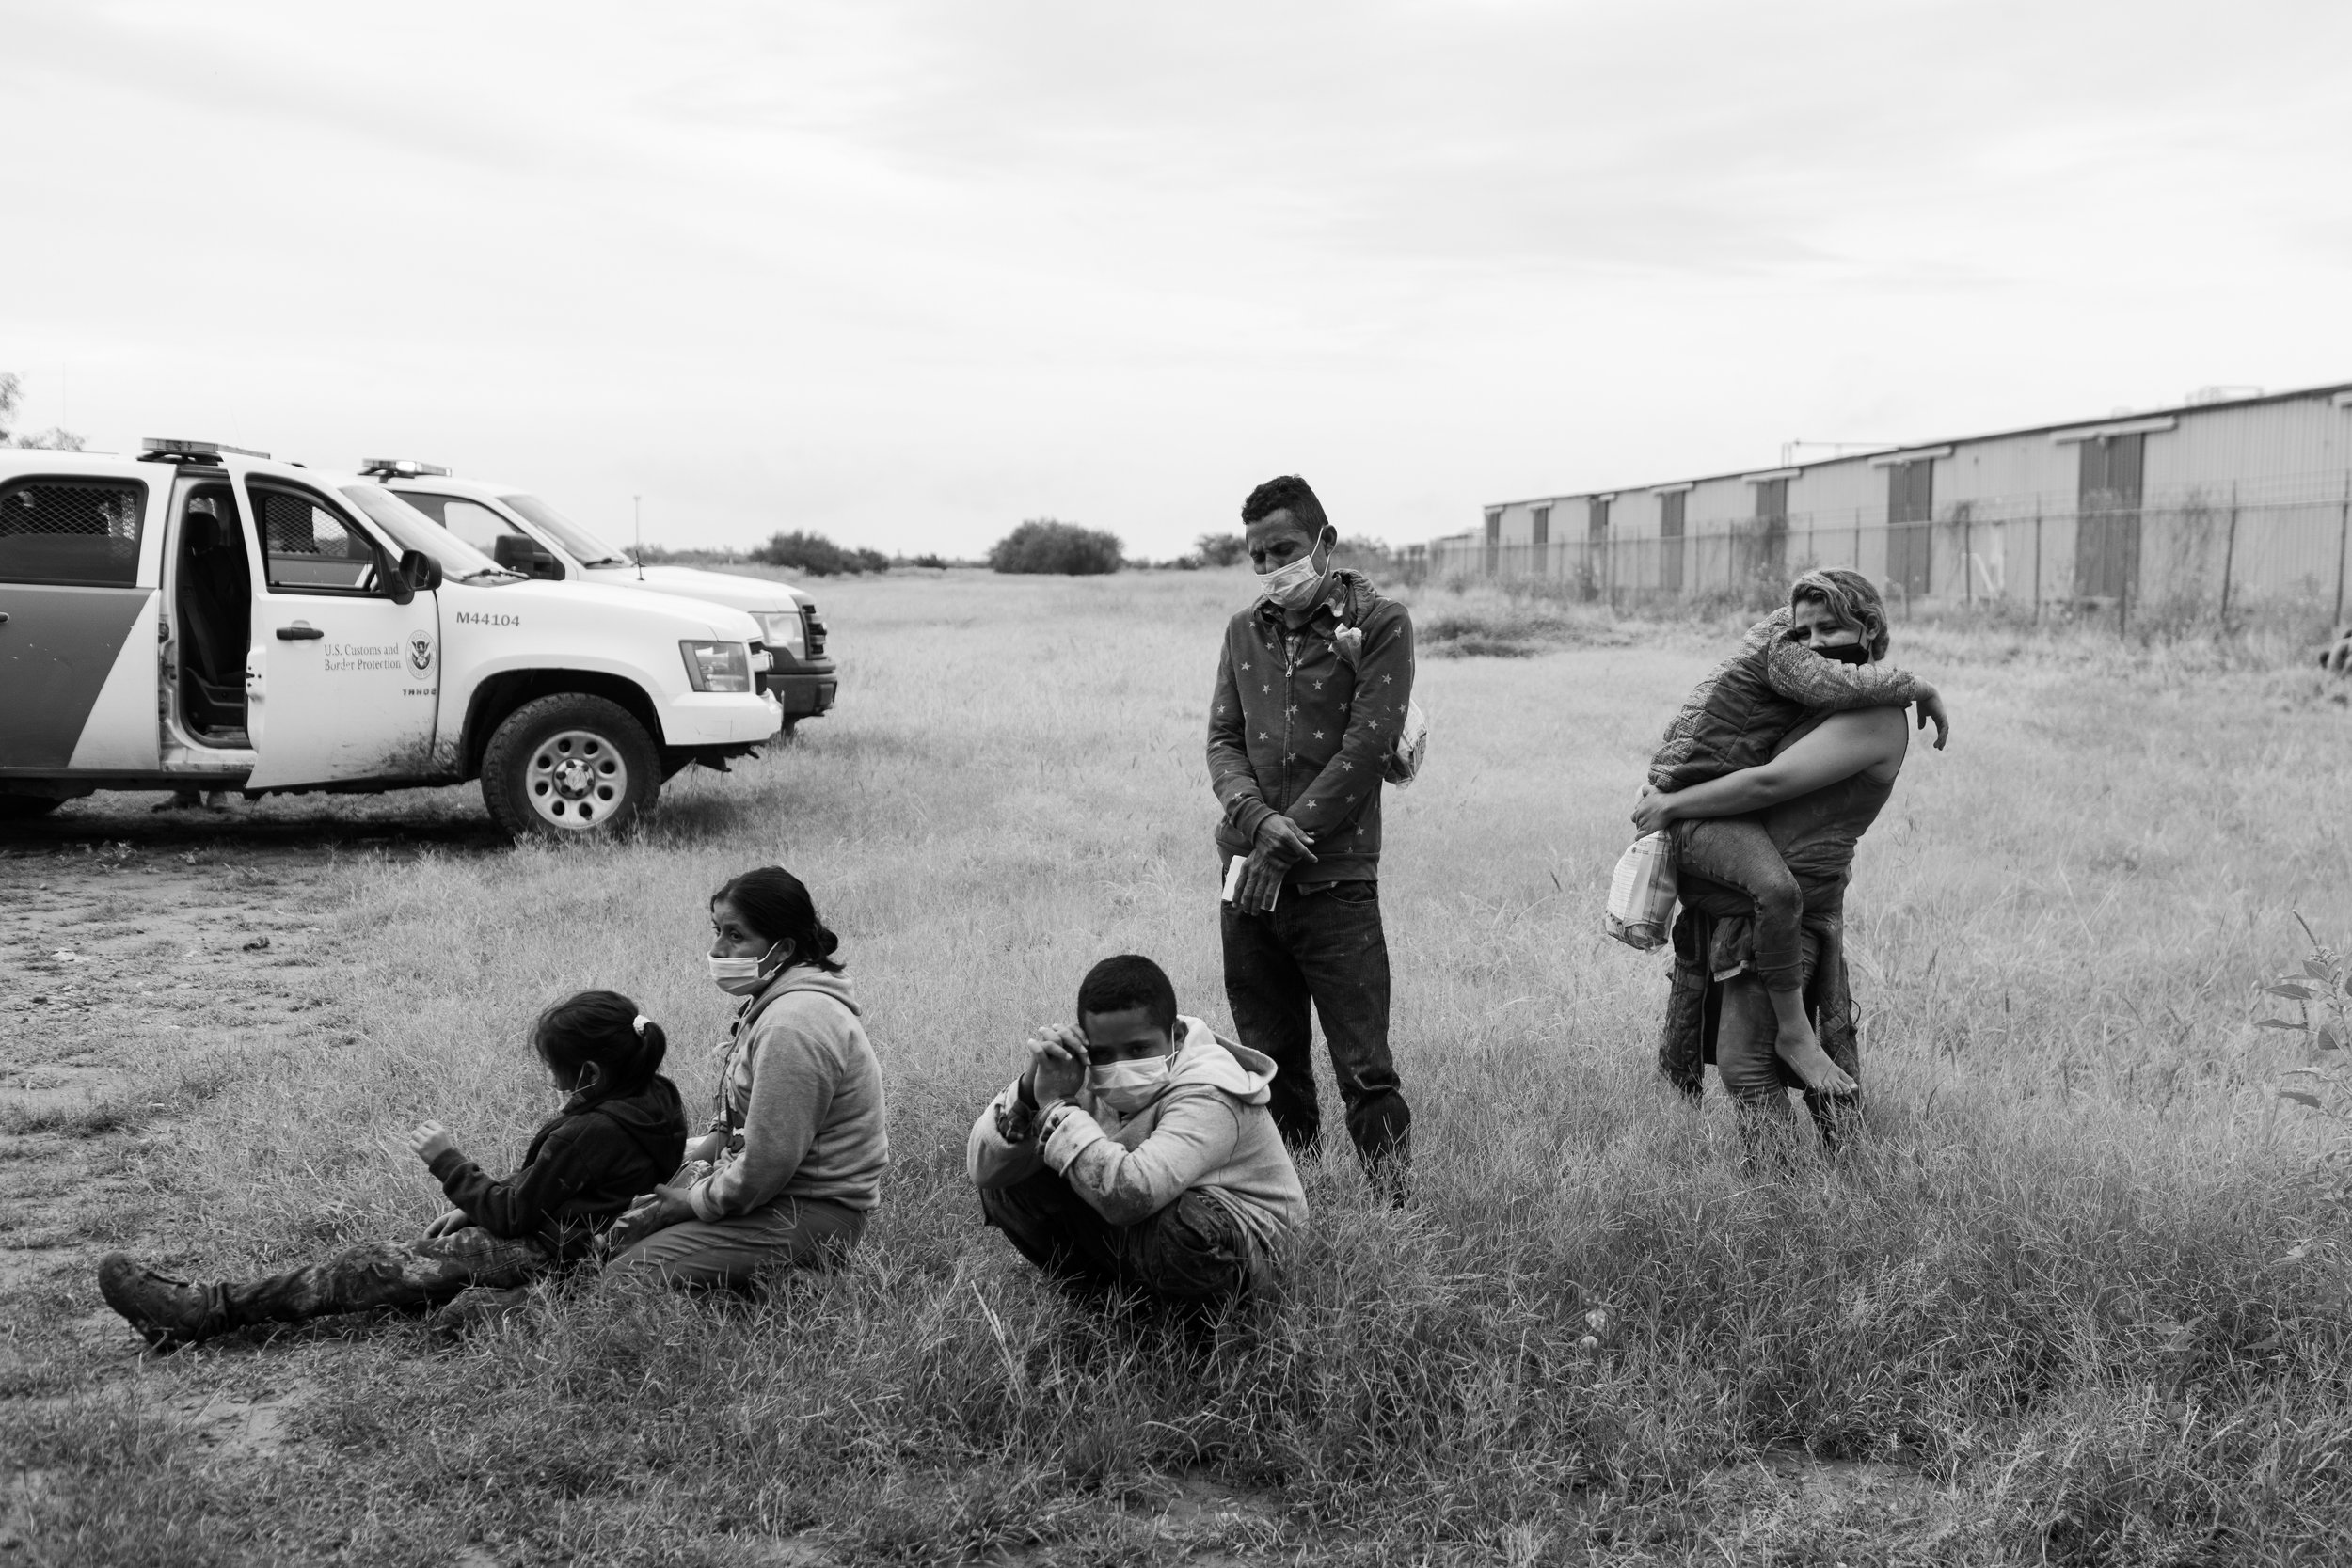  Newly arrived migrants wait in the grass in La Joya, Texas to be processed and transported by U.S. Border Patrol. 